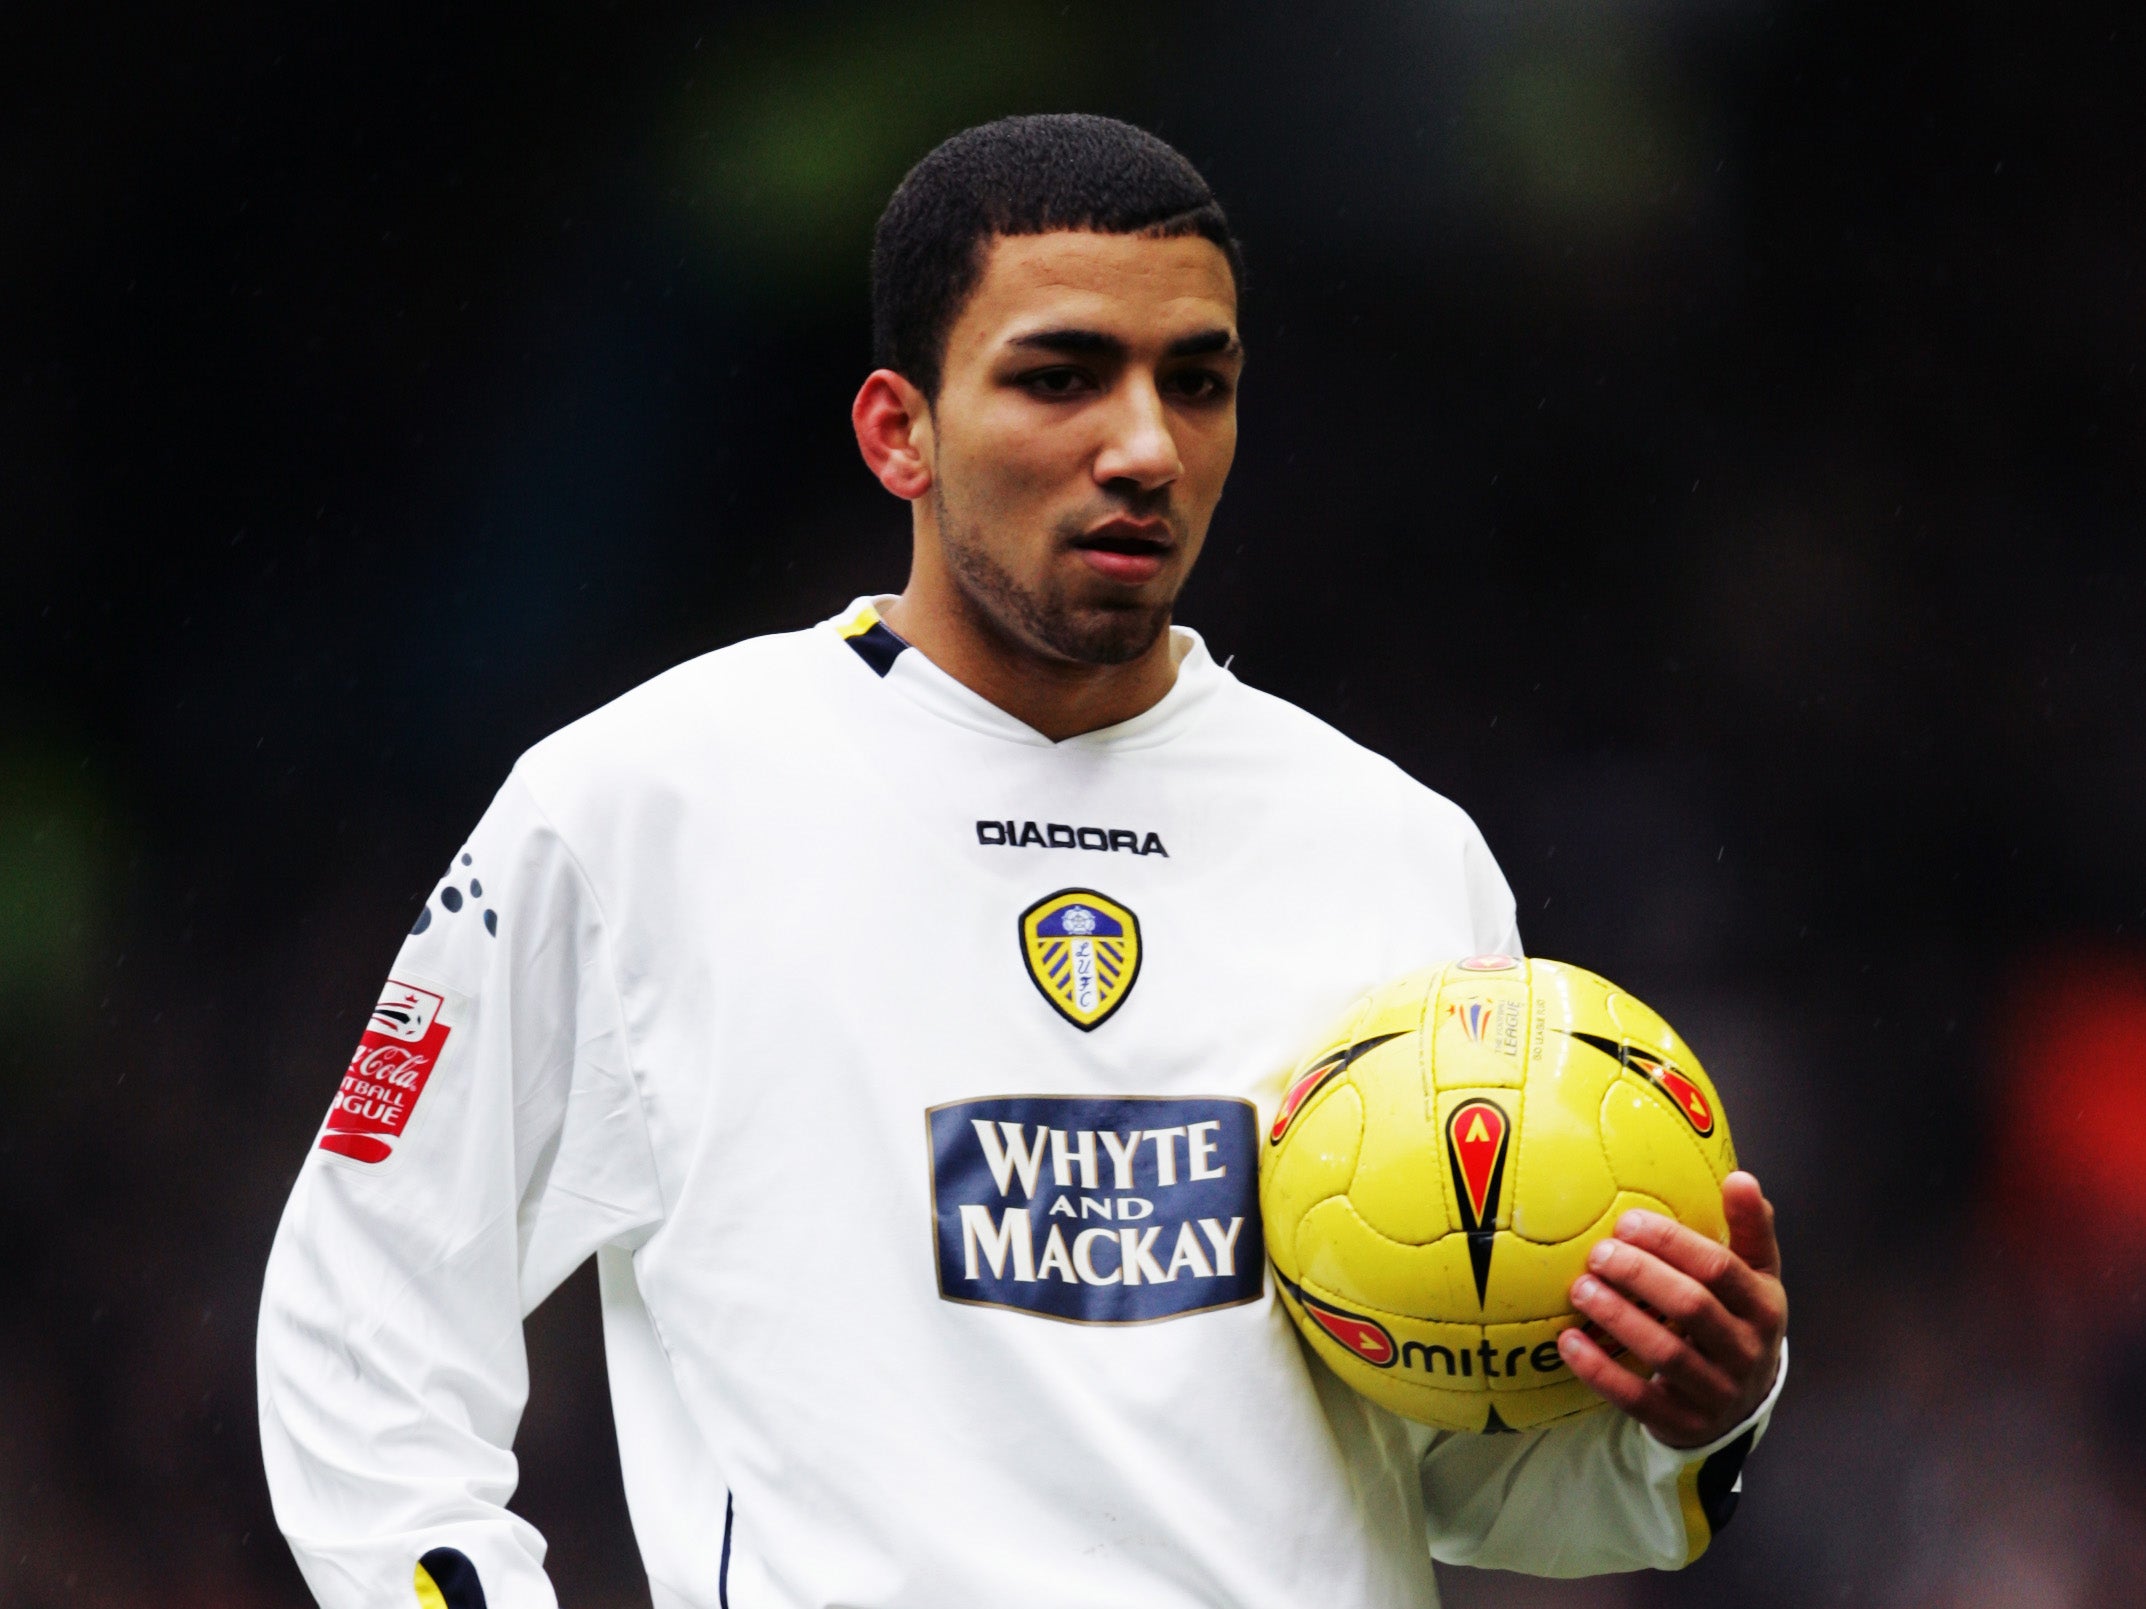 Lennon began his career at Leeds United and was considered a superstar at 12 years old